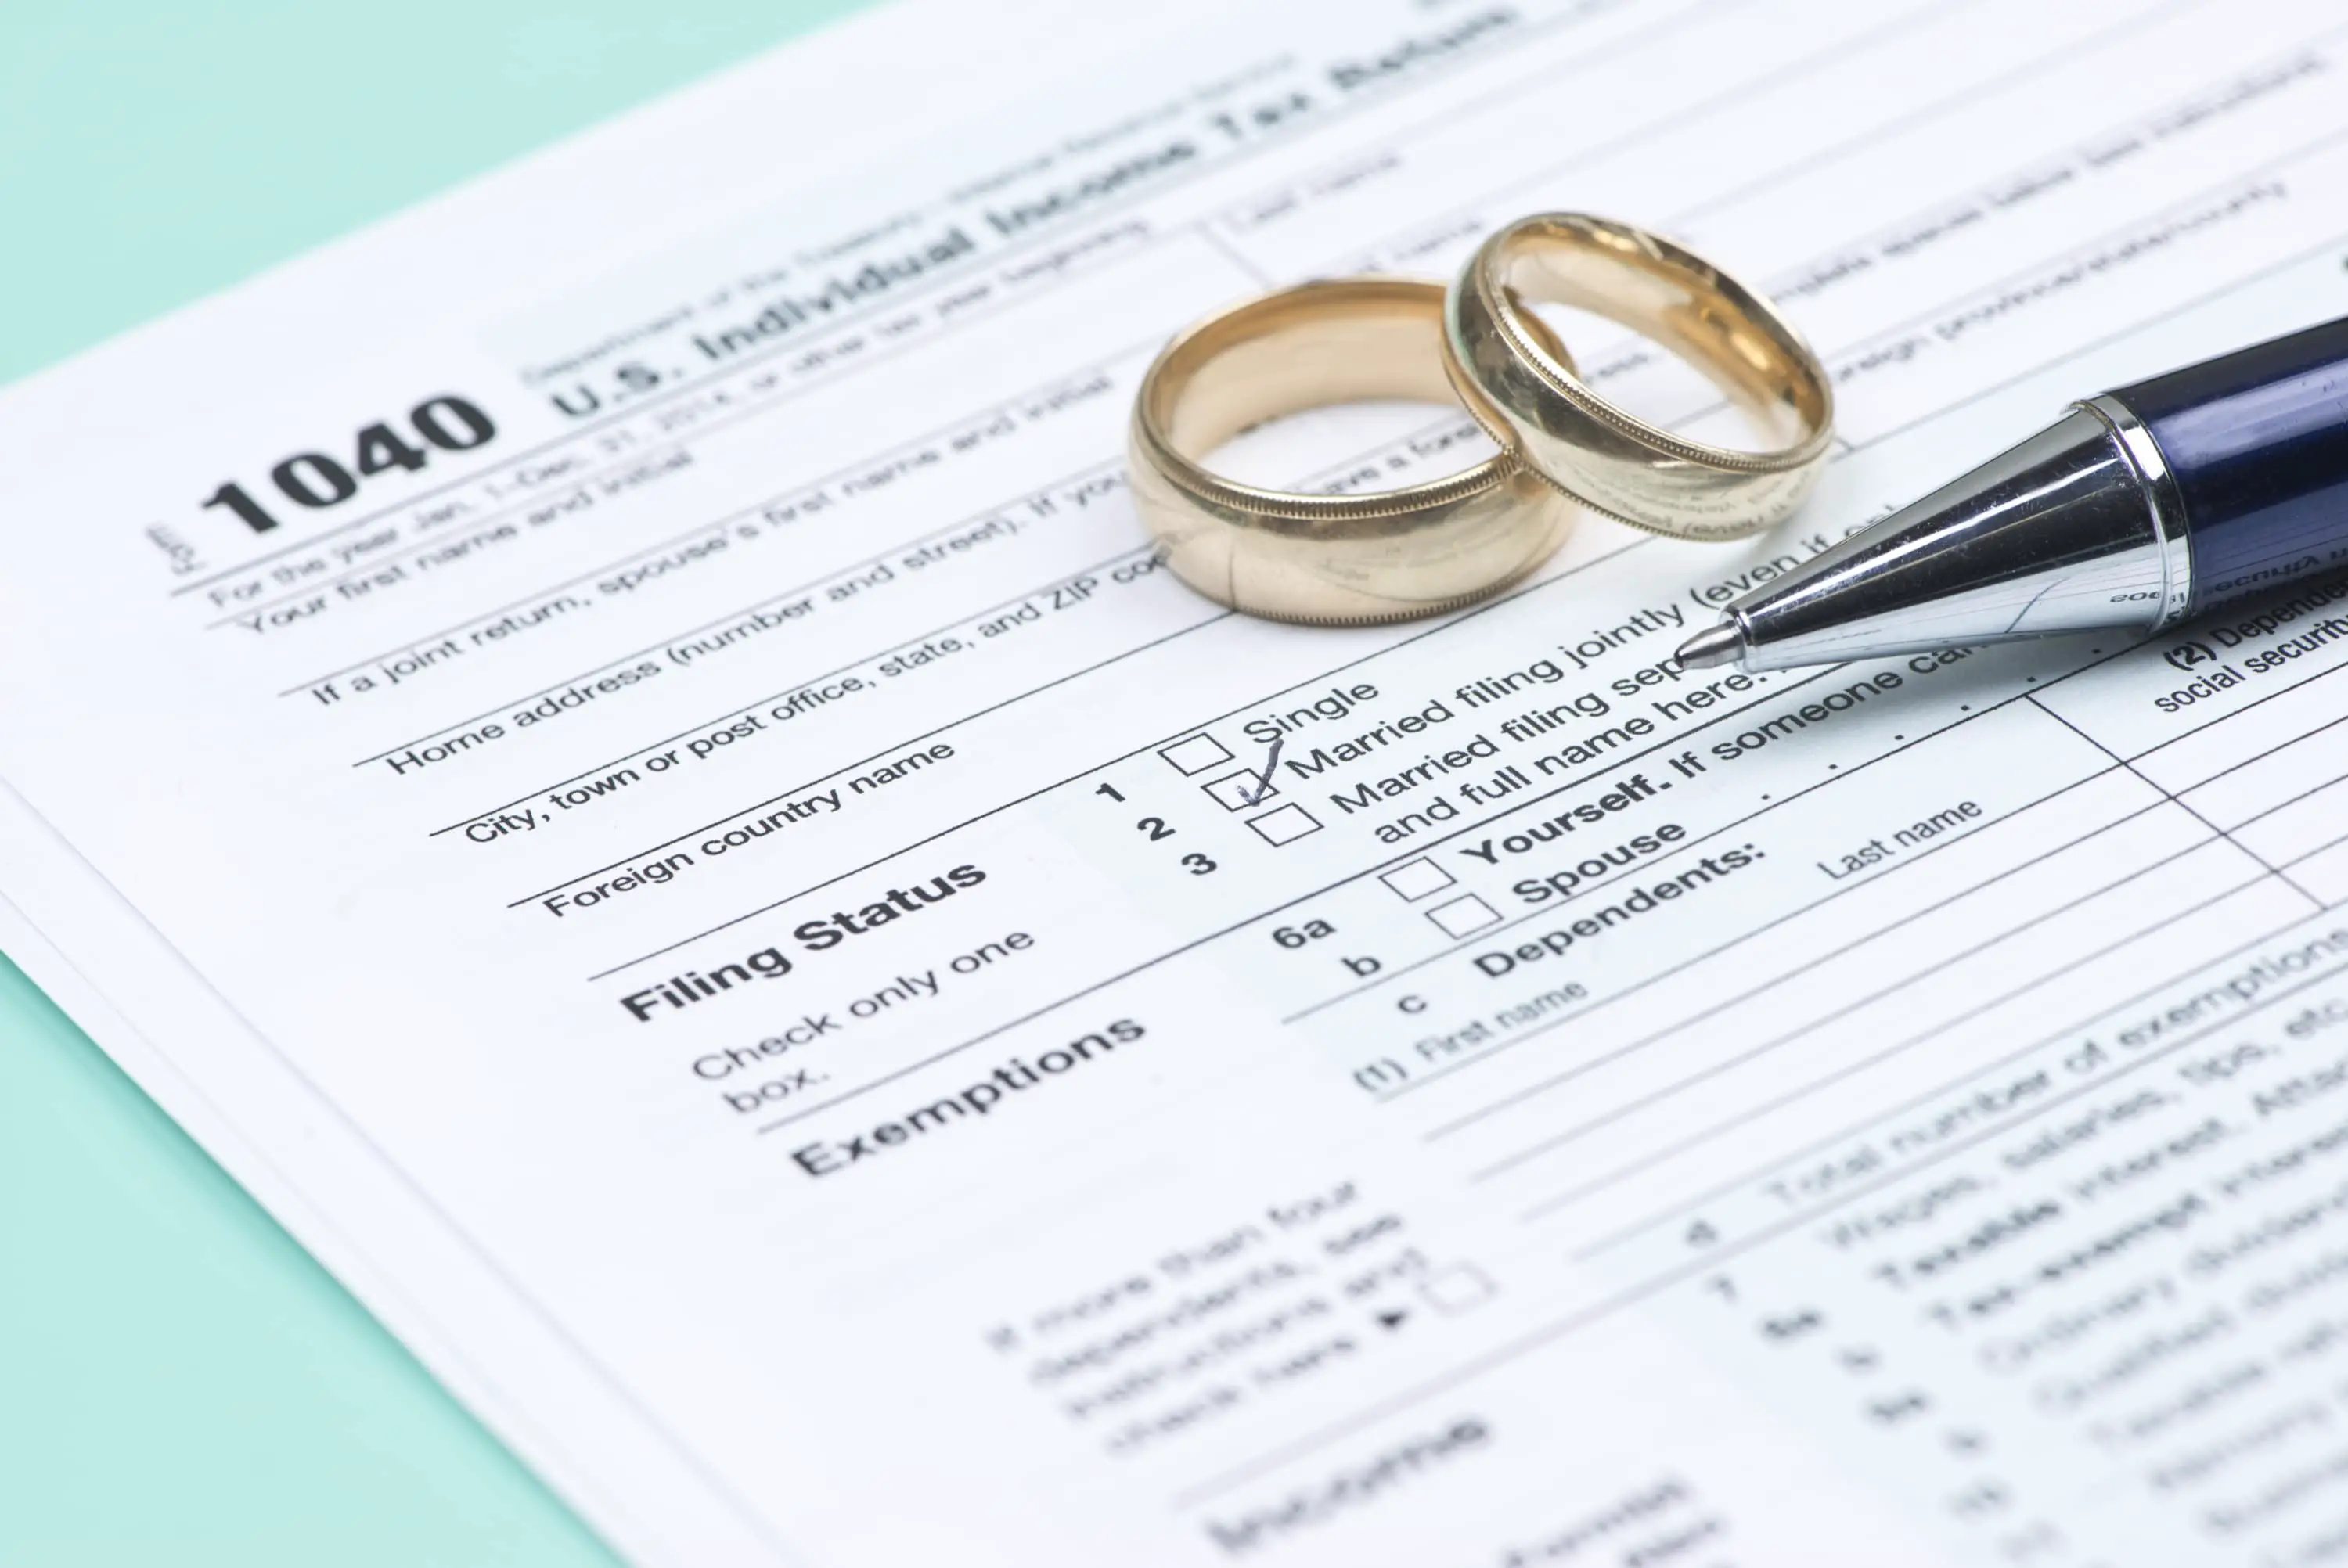 Married Filing Separately